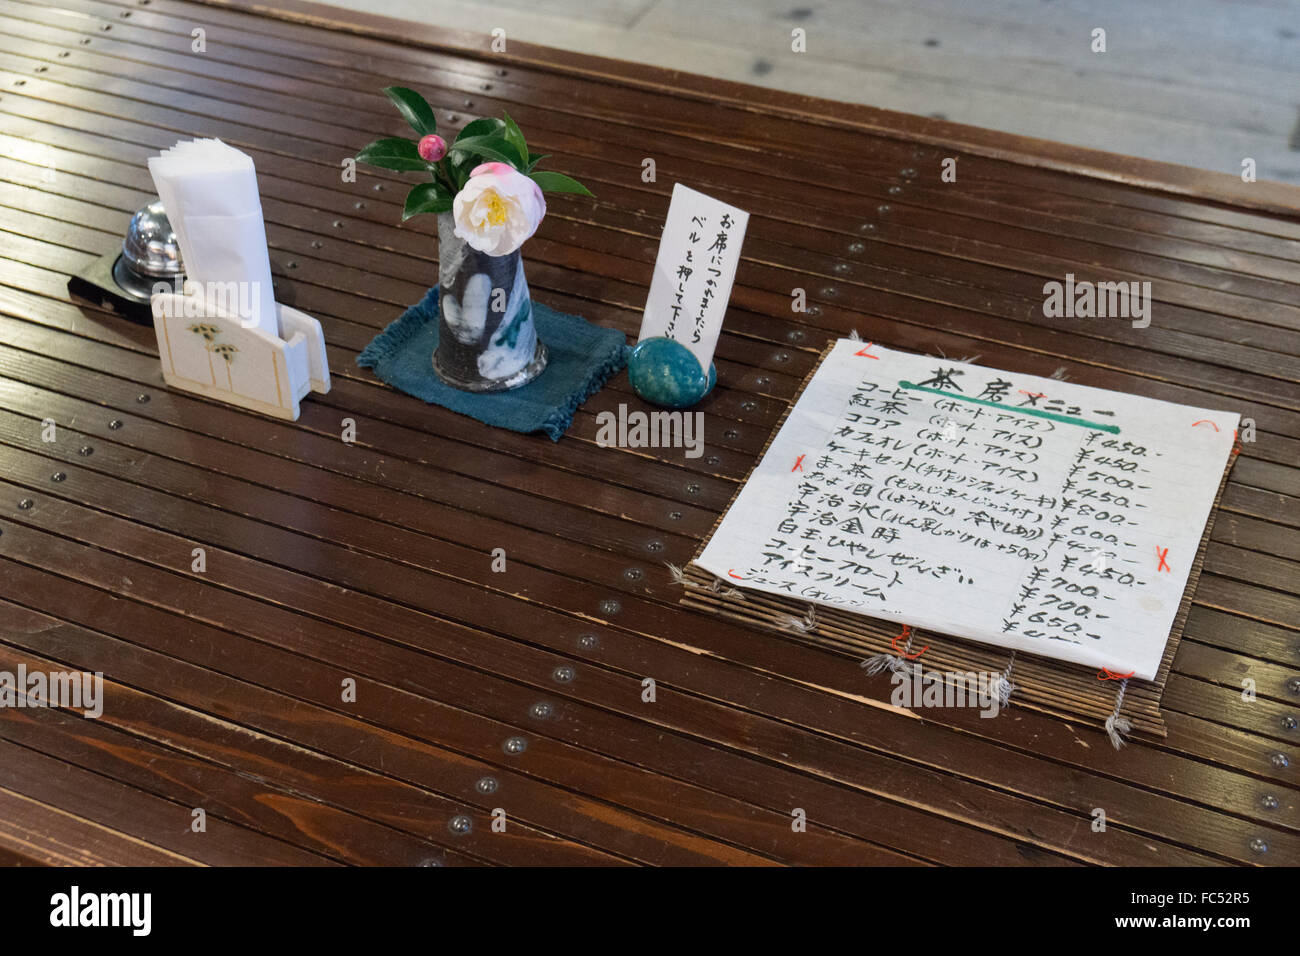 menu and table in traditional Japanese tea house Stock Photo